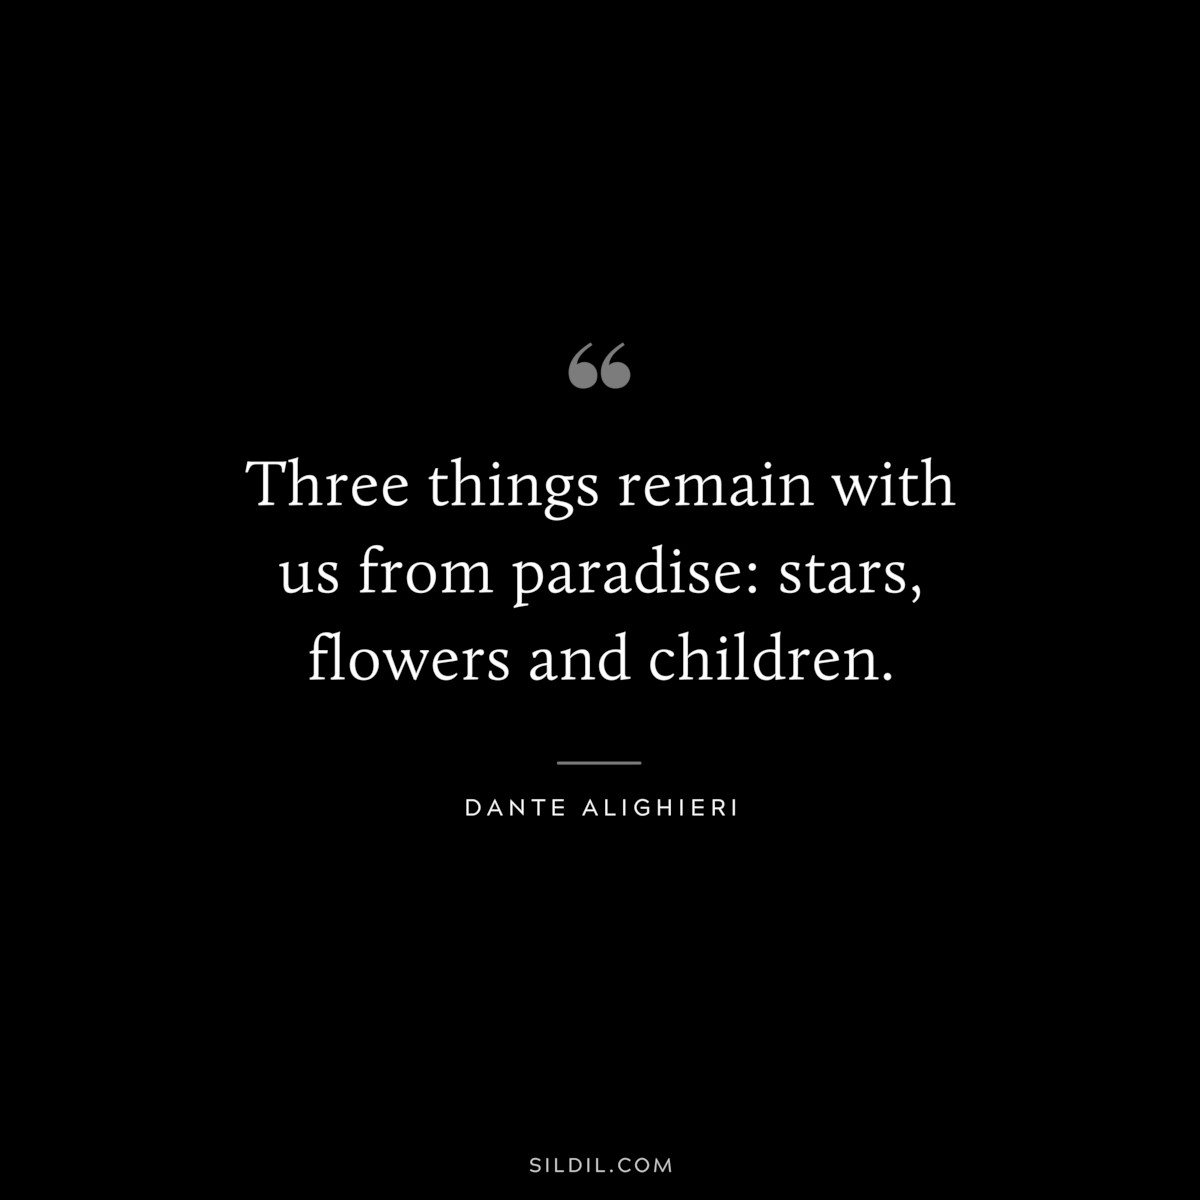 Three things remain with us from paradise: stars, flowers and children. ― Dante Alighieri